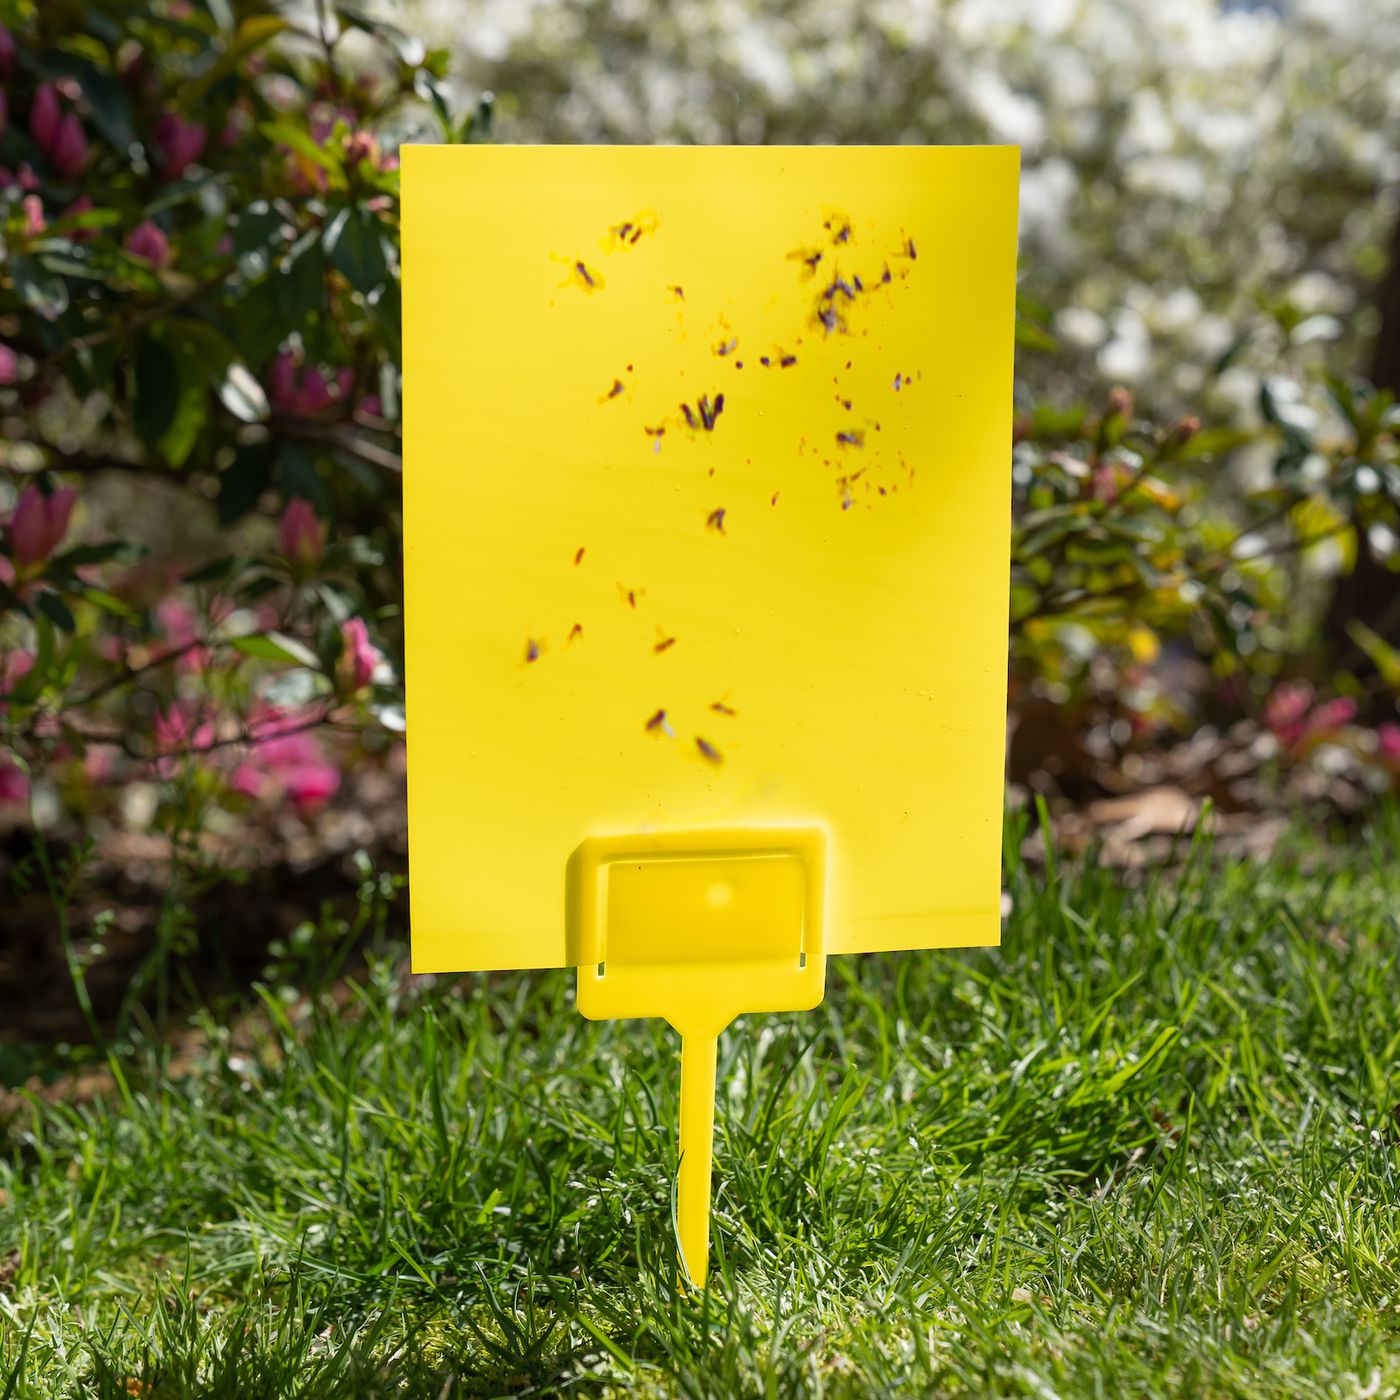 Flies Bee Catcher Pests Insect Hanging Trap Farming Gardening Pest-Killer-Tool 